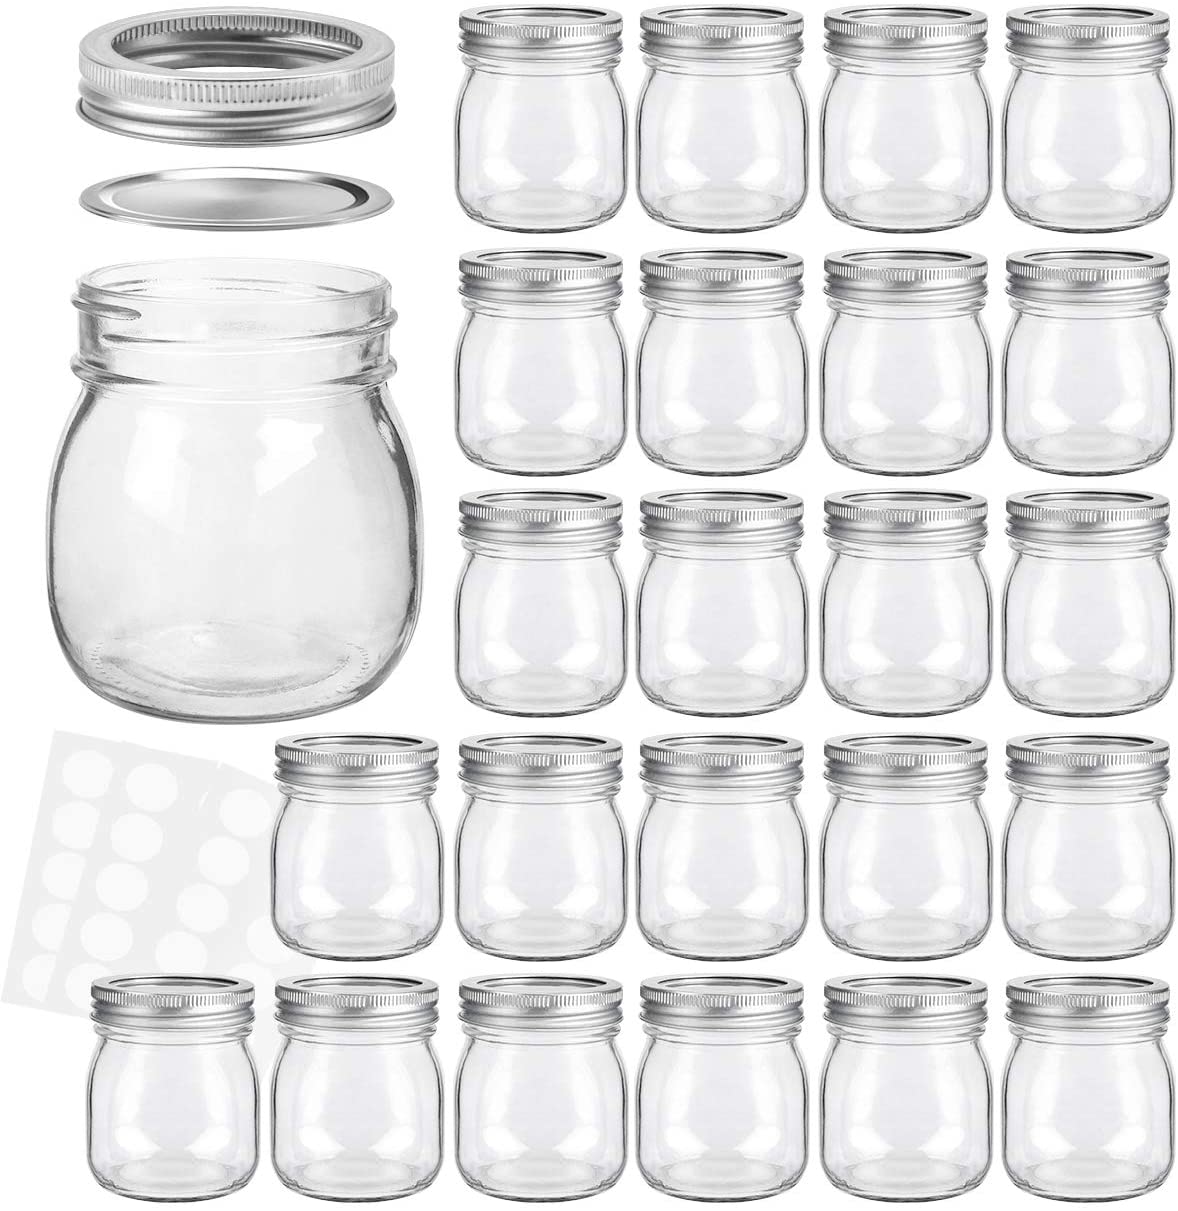 Custom High quality Canning Jar 300ml 10oz wide mouth Glass mason jars with metal lid for Jam Jelly Honey Beans Spice